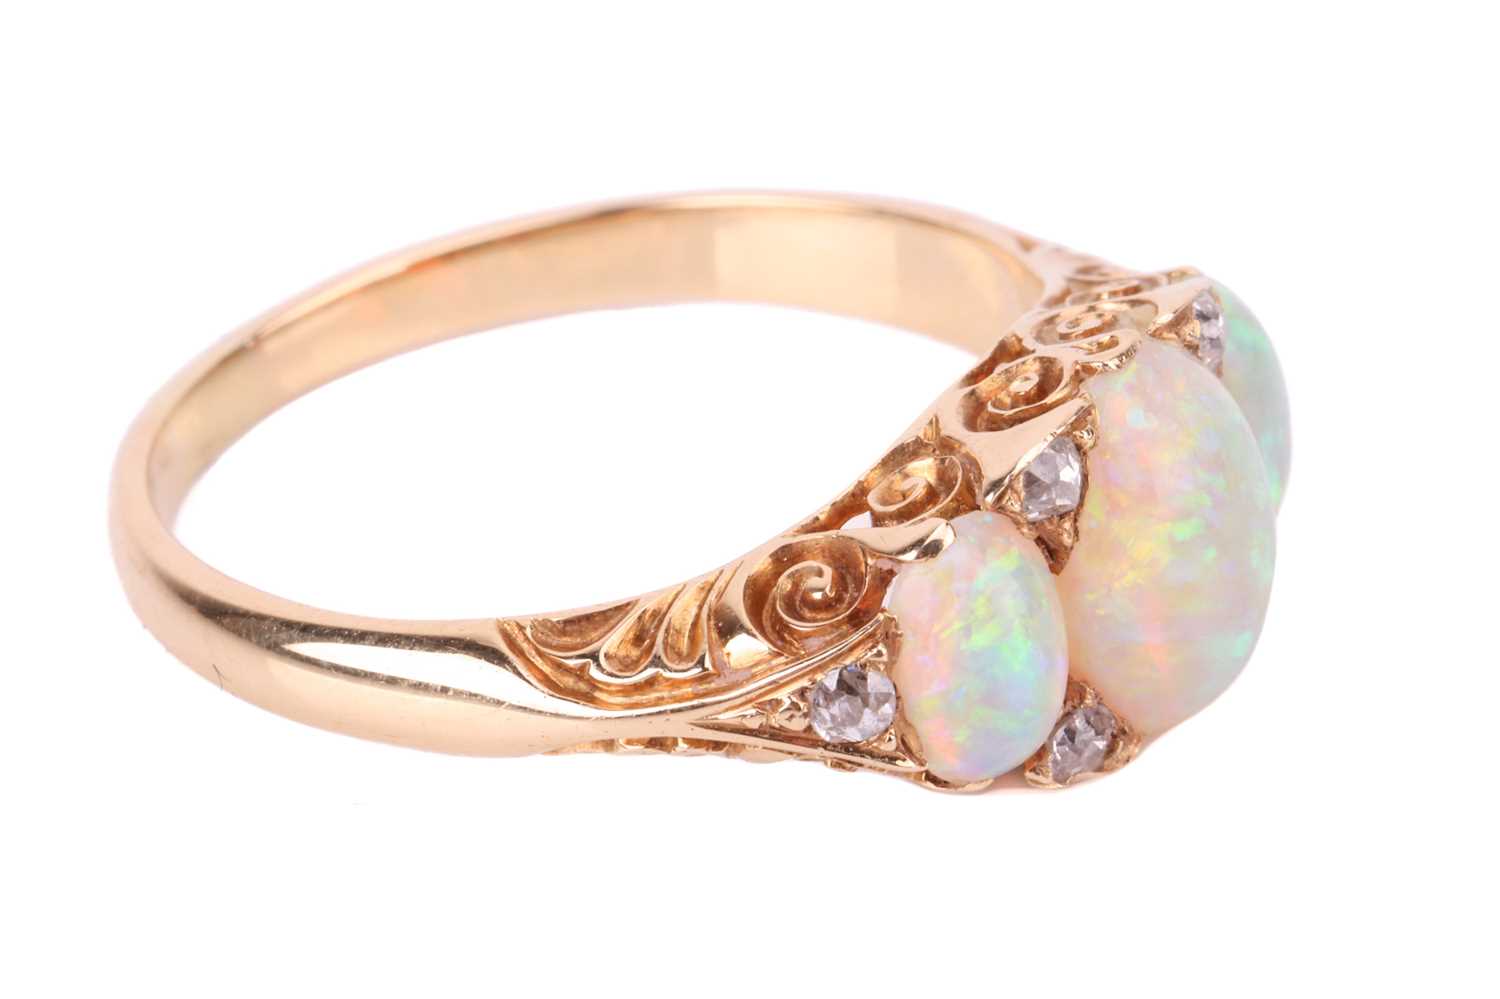 An opal and diamond half-hoop ring, featuring three graduated oval cabochons, displaying spectral pl - Image 2 of 4